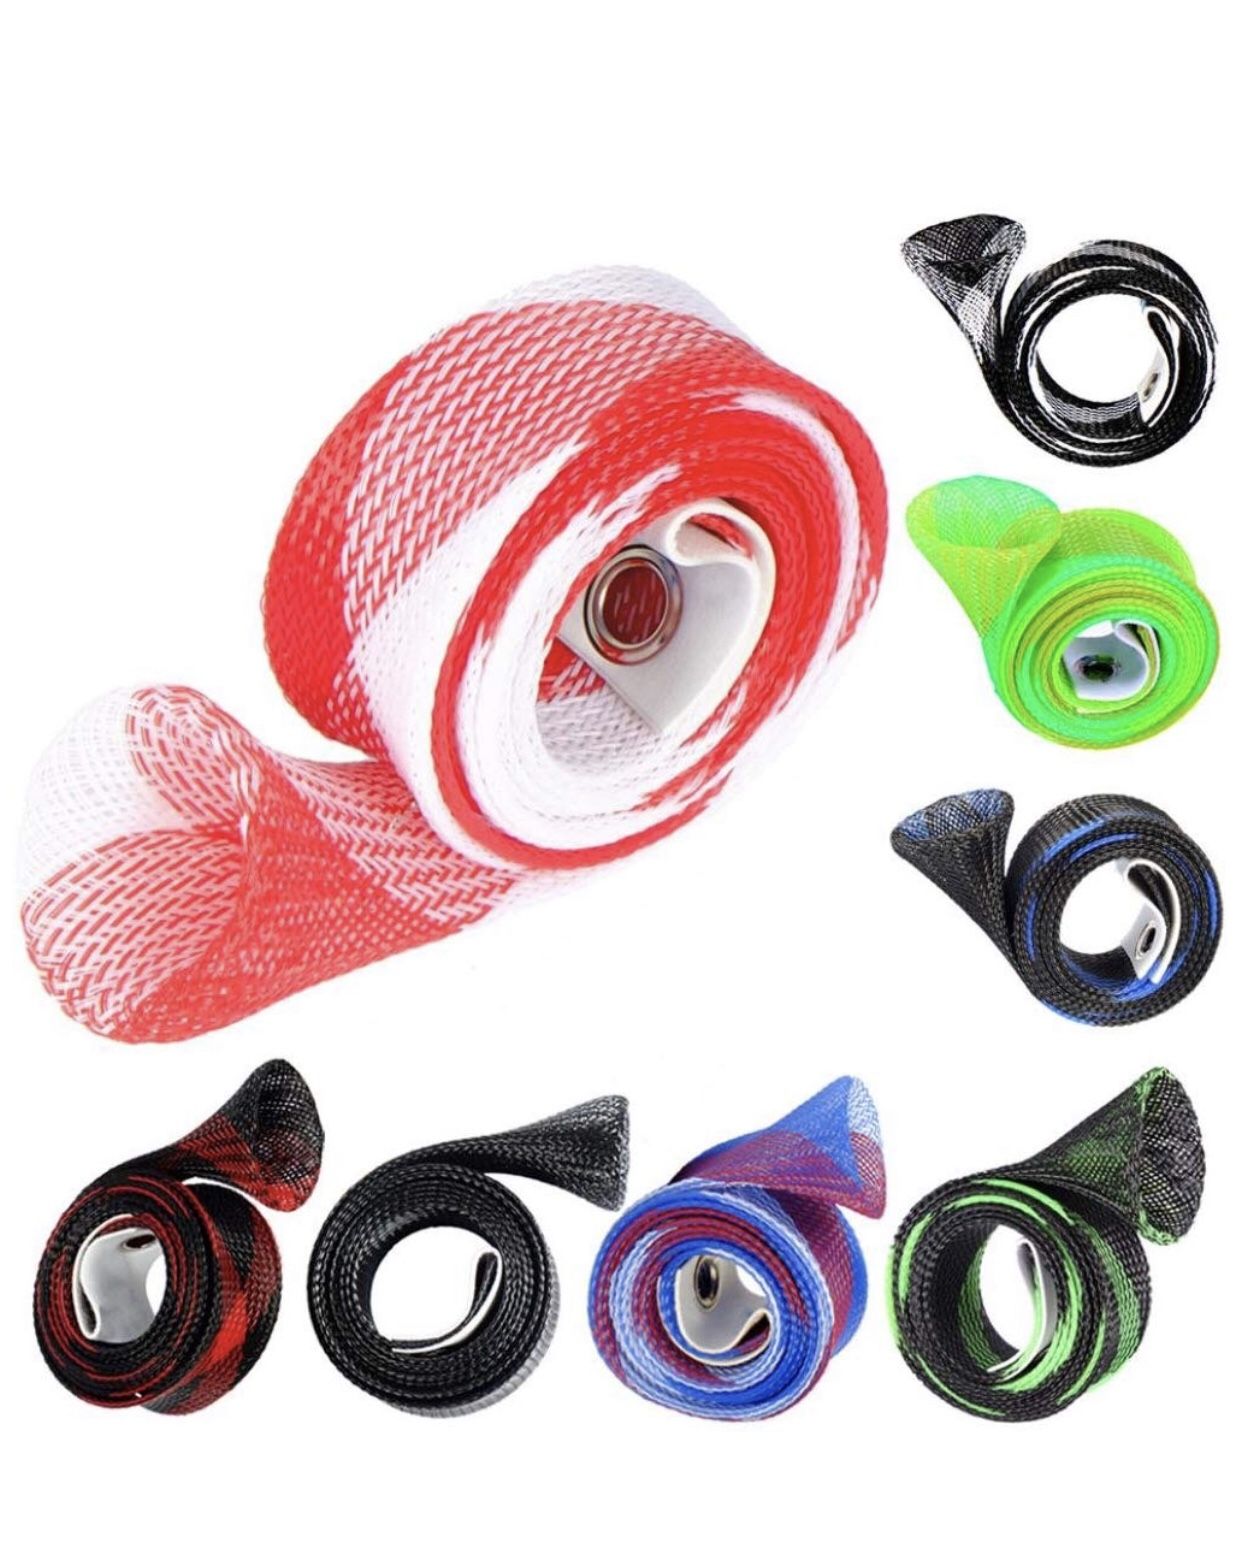 Brand new-Fishing Rod Cover,Spinning Rod Sleeve Pole Glove Protector Cover for Fly,Spinning,Casting,Sea Fishing Rod